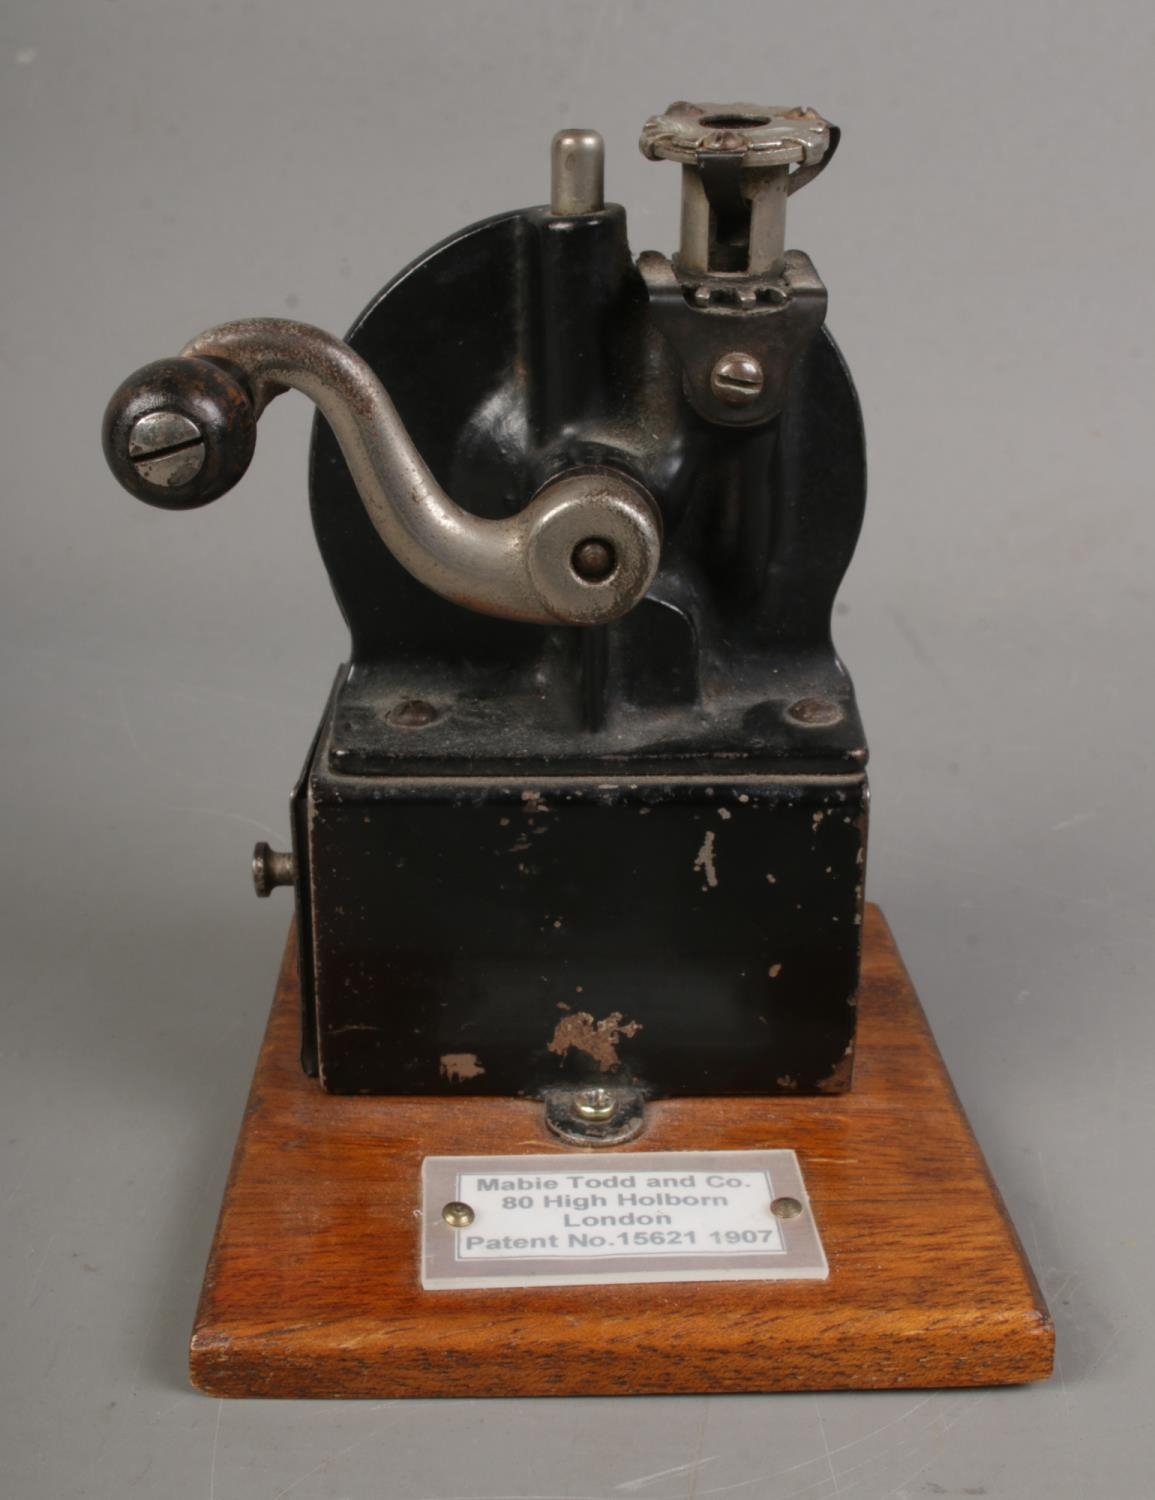 An early 20th century Mabie Todd & Co mechanical pencil sharpener. - Image 2 of 2